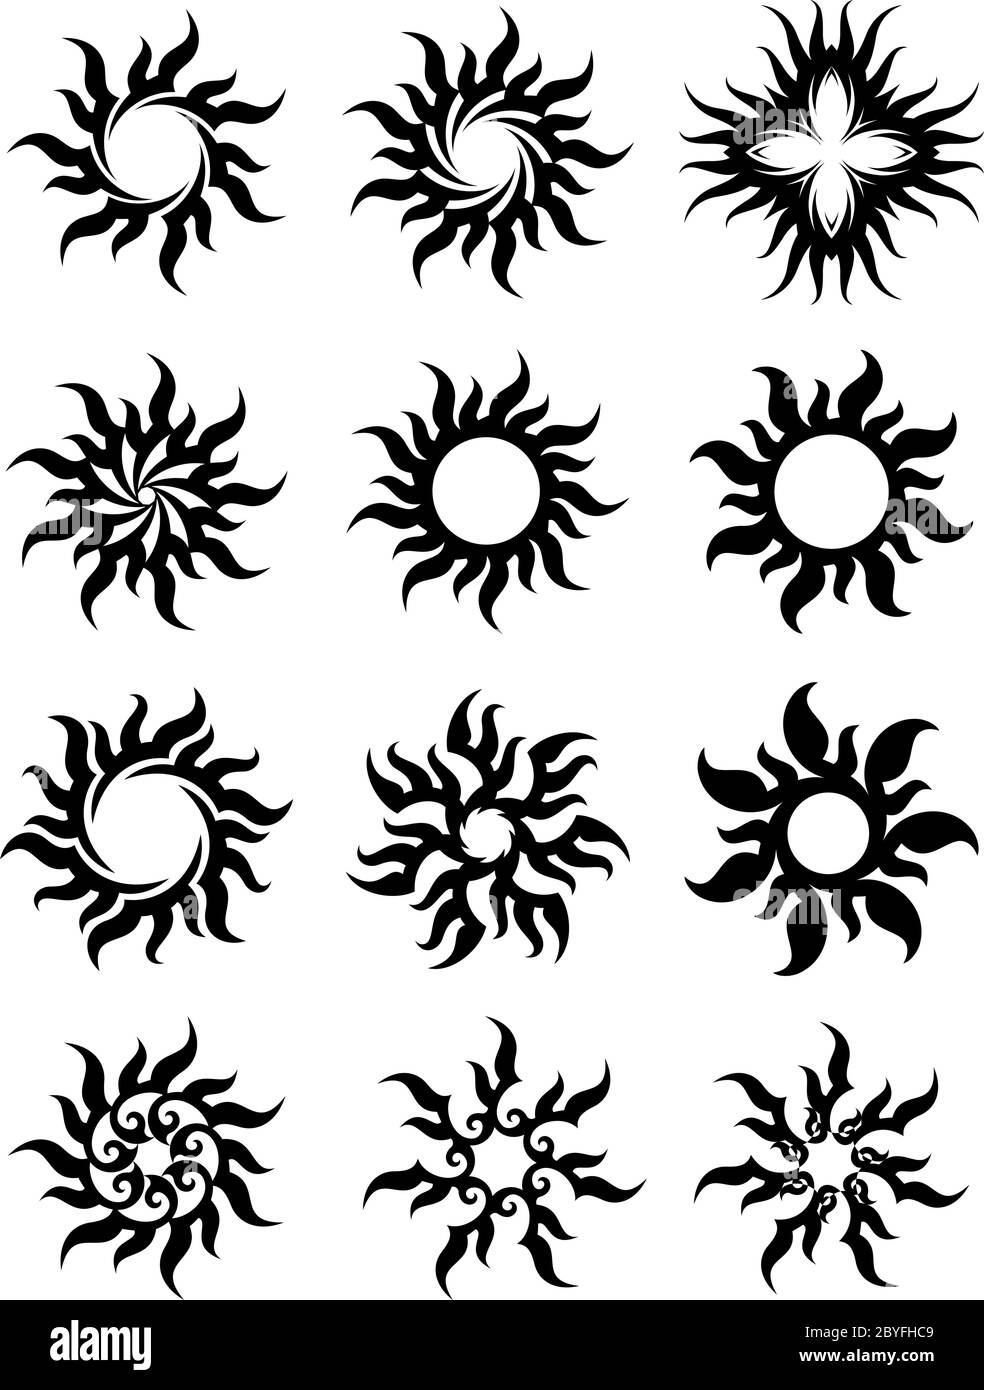 Amazon.com: Datewithshower Temporary Tattoos 6 Sheets Celtic Tree of Life  with Sun and Moon Tattoo Stickers for Adult Kids Women Men Arms Legs Chest  Waist Neck 3.7 X Inch